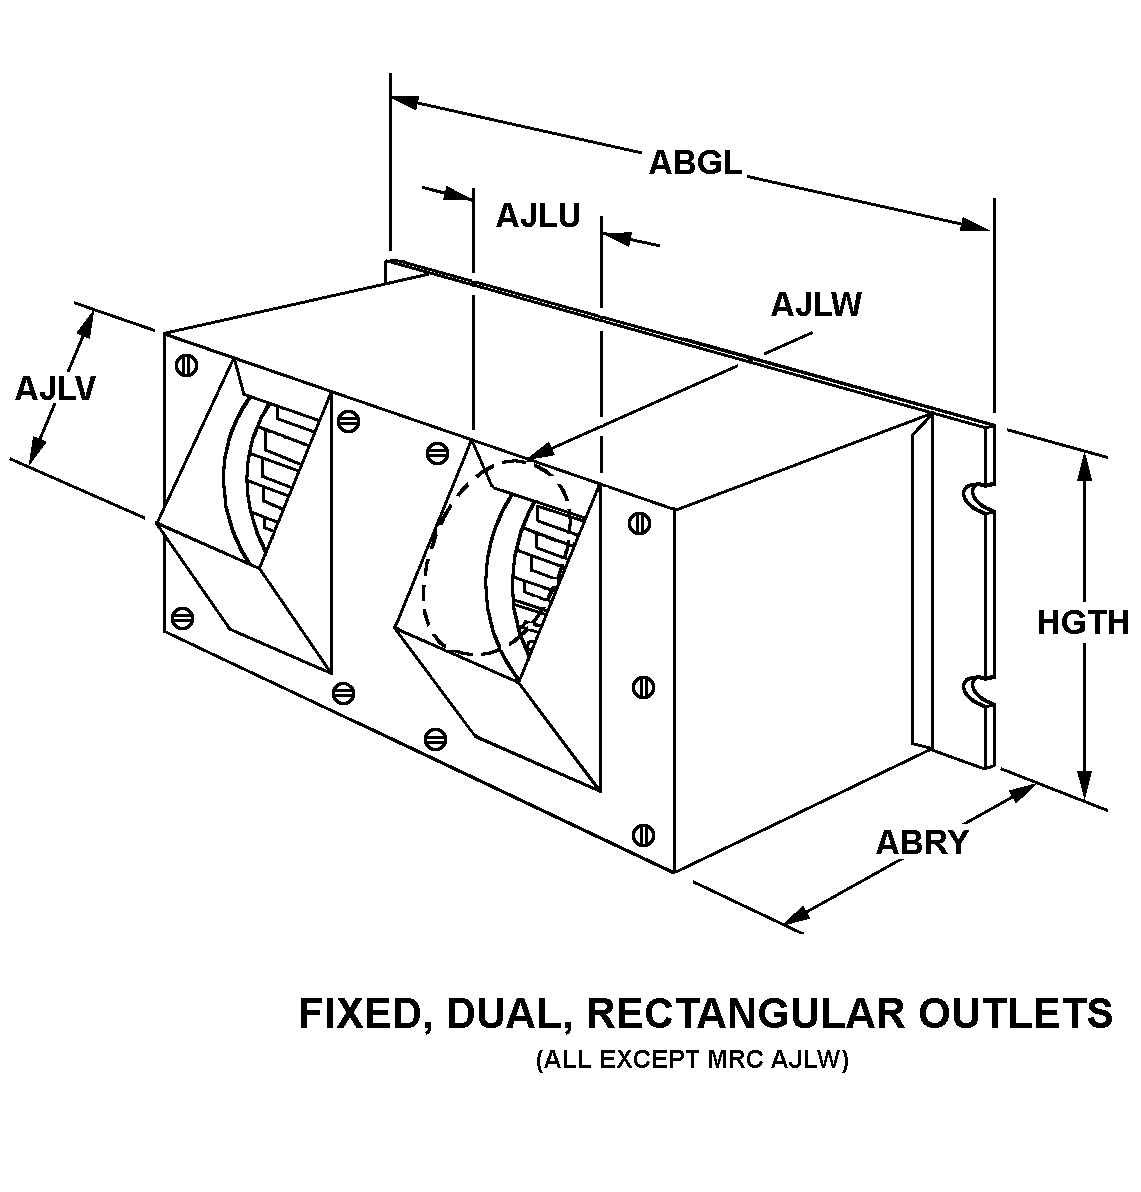 FIXED, DUAL, RECTANGULAR OUTLETS style nsn 4140-01-005-0154